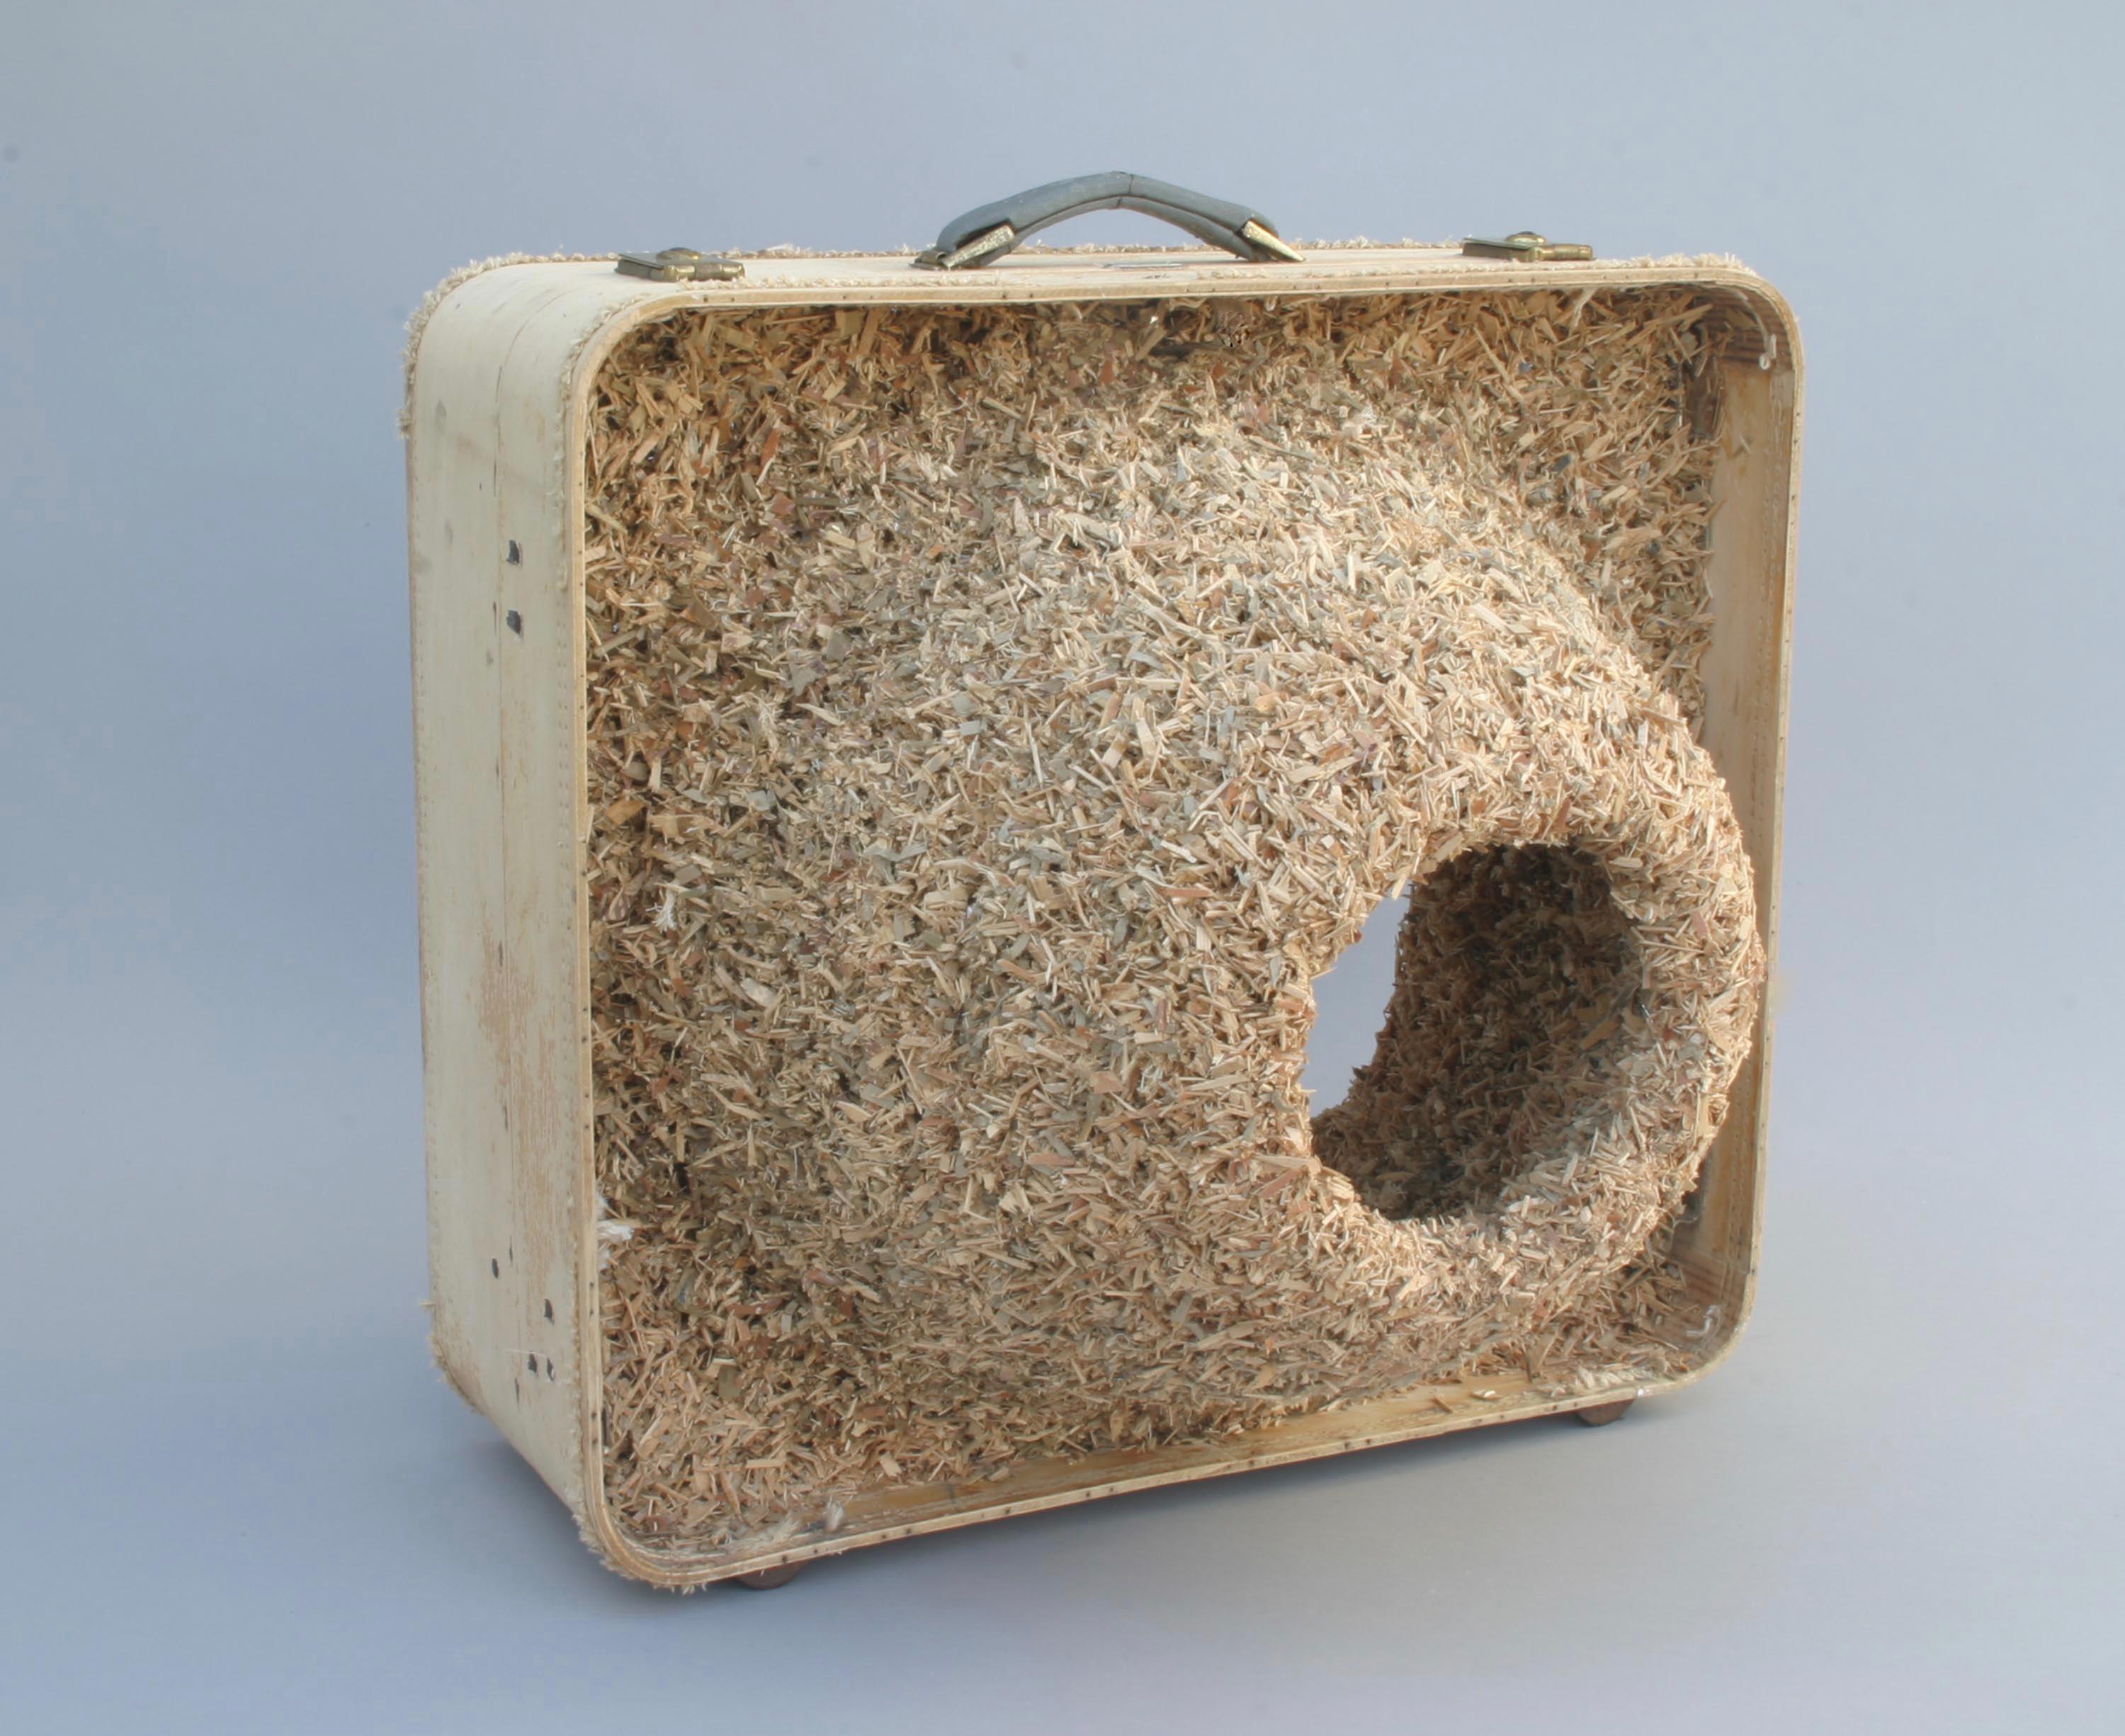 Robert Lach Abstract Sculpture - Surreal sculpture, suitcase & nest: 'Colony IV'